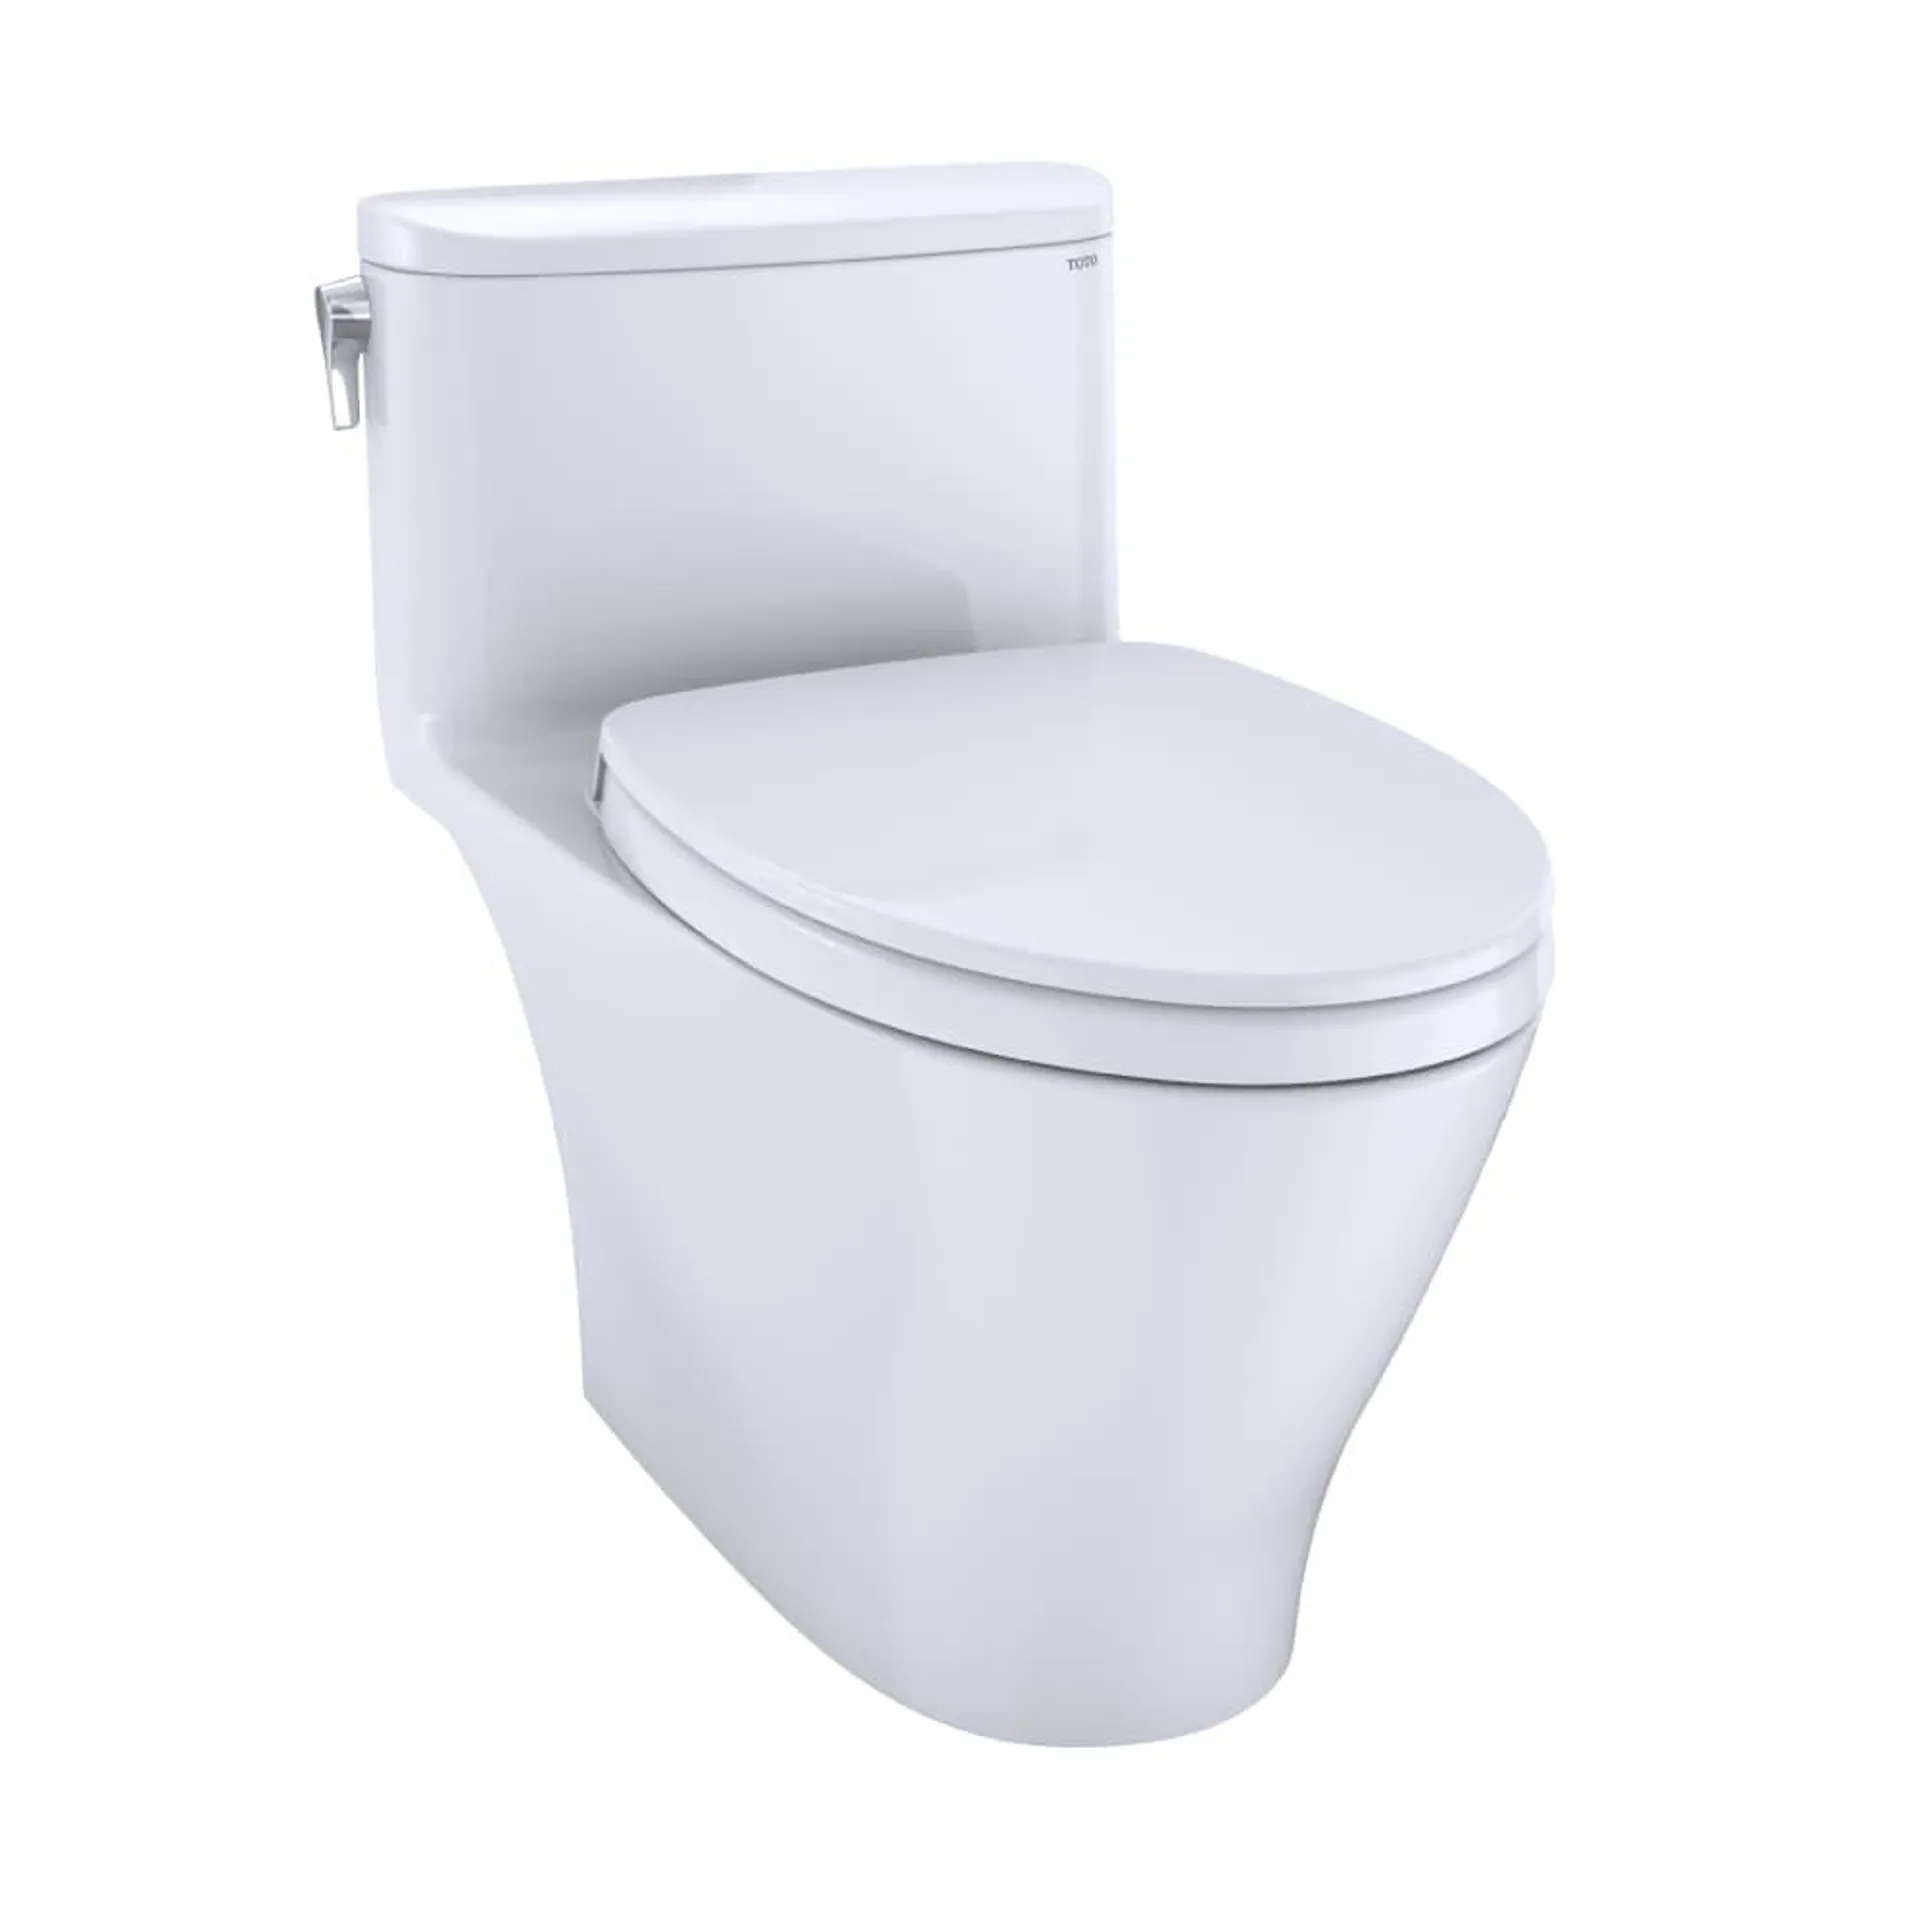 Nexus 1-Piece Elongated 1.28 GPF Toilet with SoftClose Seat in Cotton White